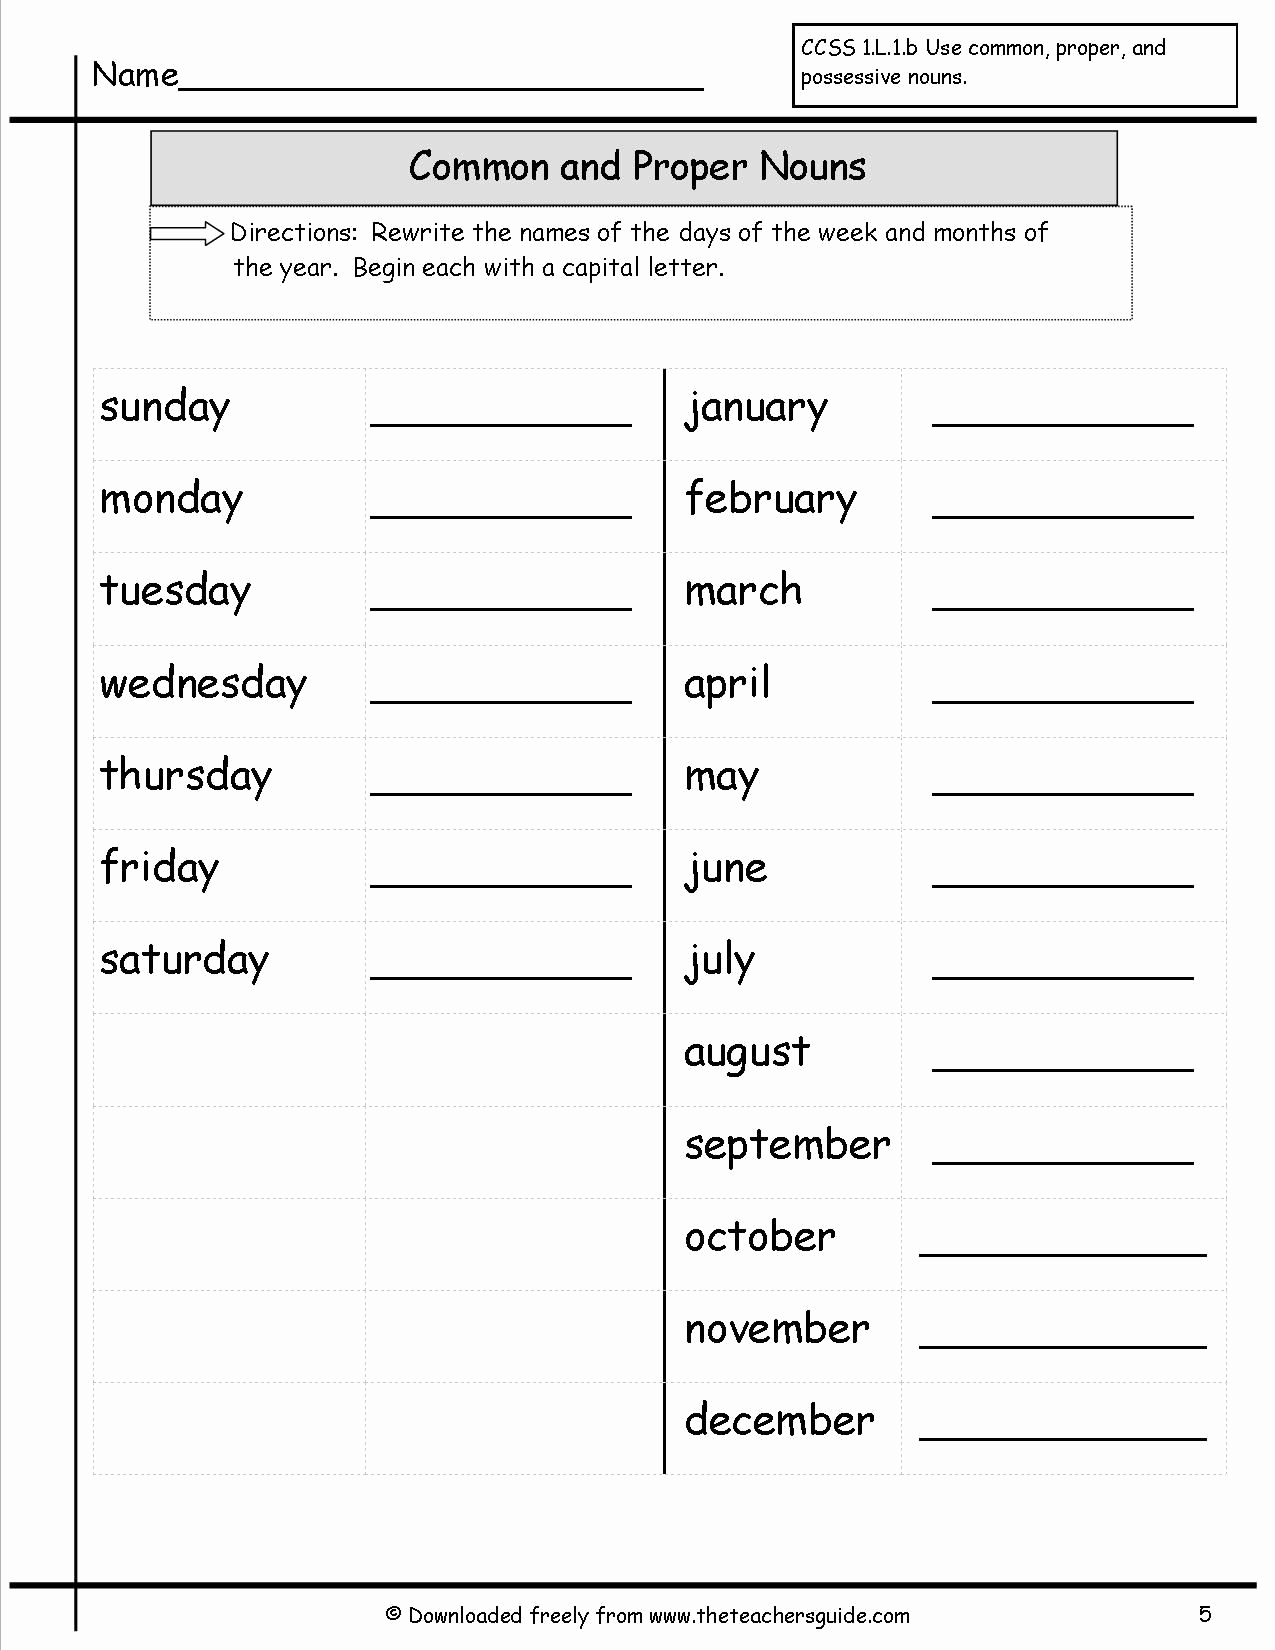 Free Proper Noun Worksheets Luxury Mon and Proper Nouns Worksheets From the Teacher S